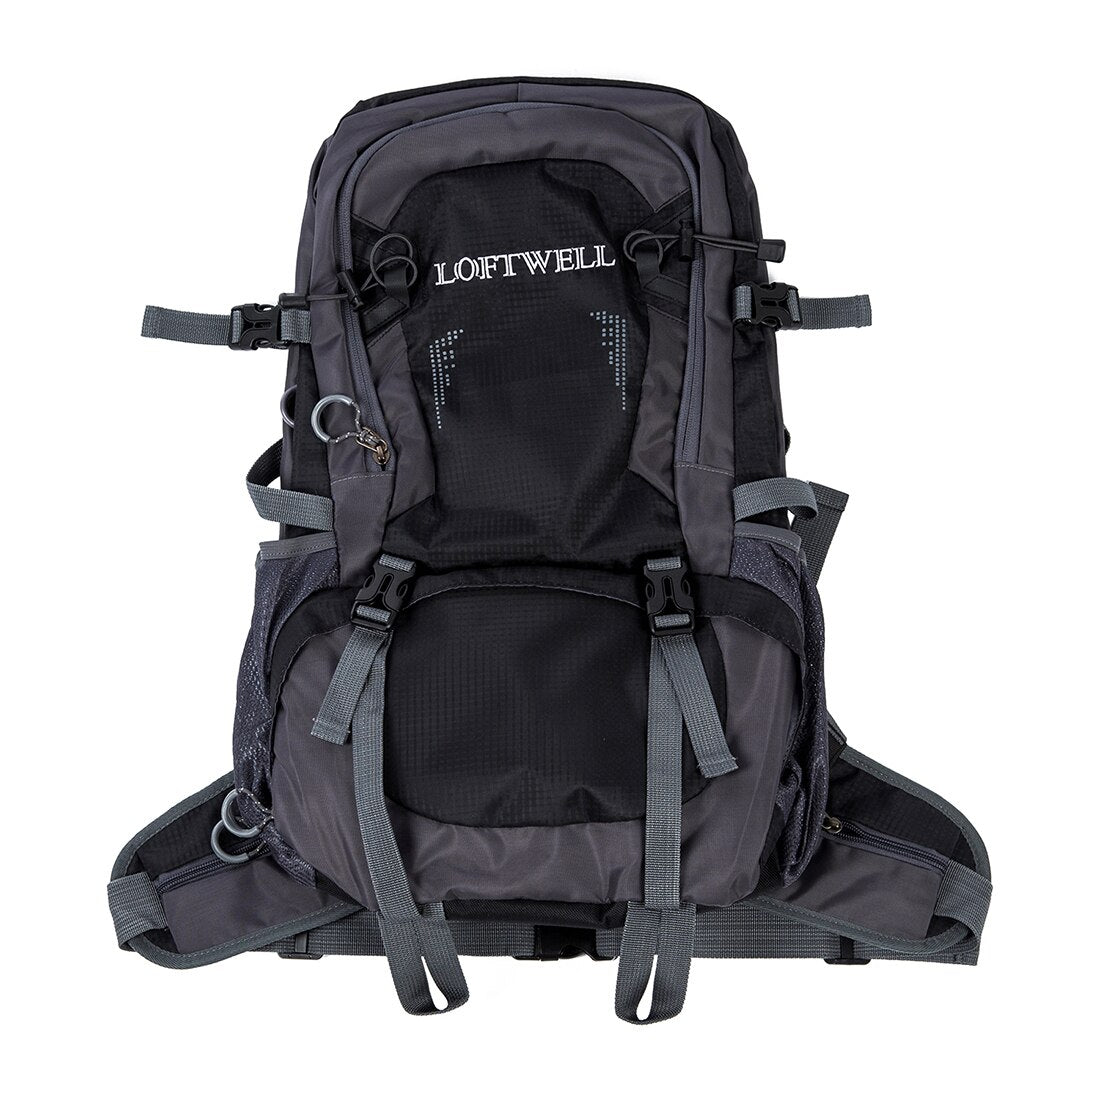 New LOFTWELL Lightweight and durable travel  backpack daypack for men and women (black and gray) - ebowsos